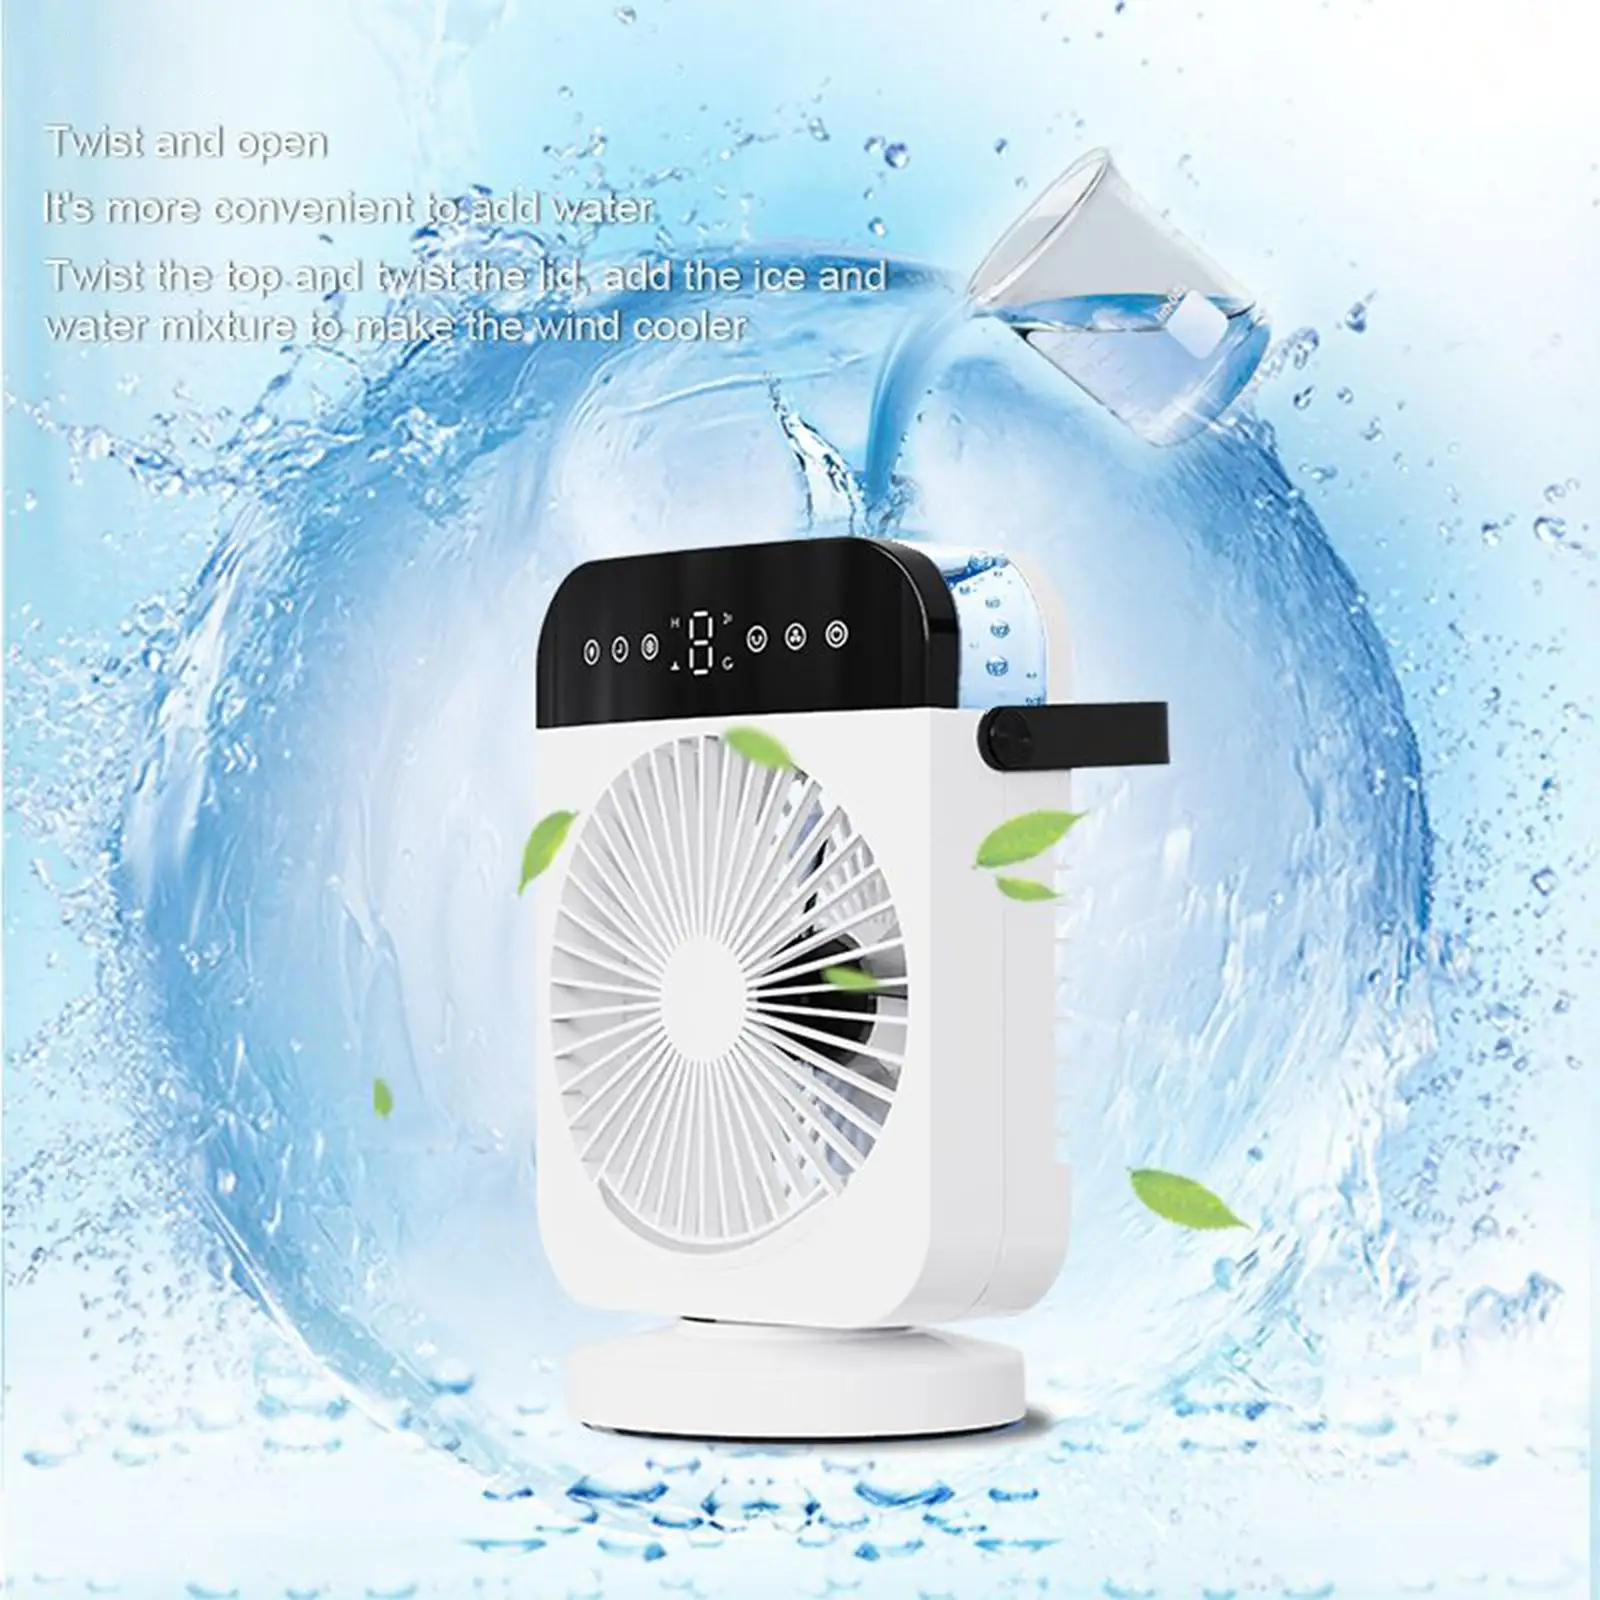 Portable Air Wind Speeds Mini Air Cooler Fan Air Conditioning Desk Fan For Personal Use Home School Desktop - Portable Air Conditioner - AliExpress